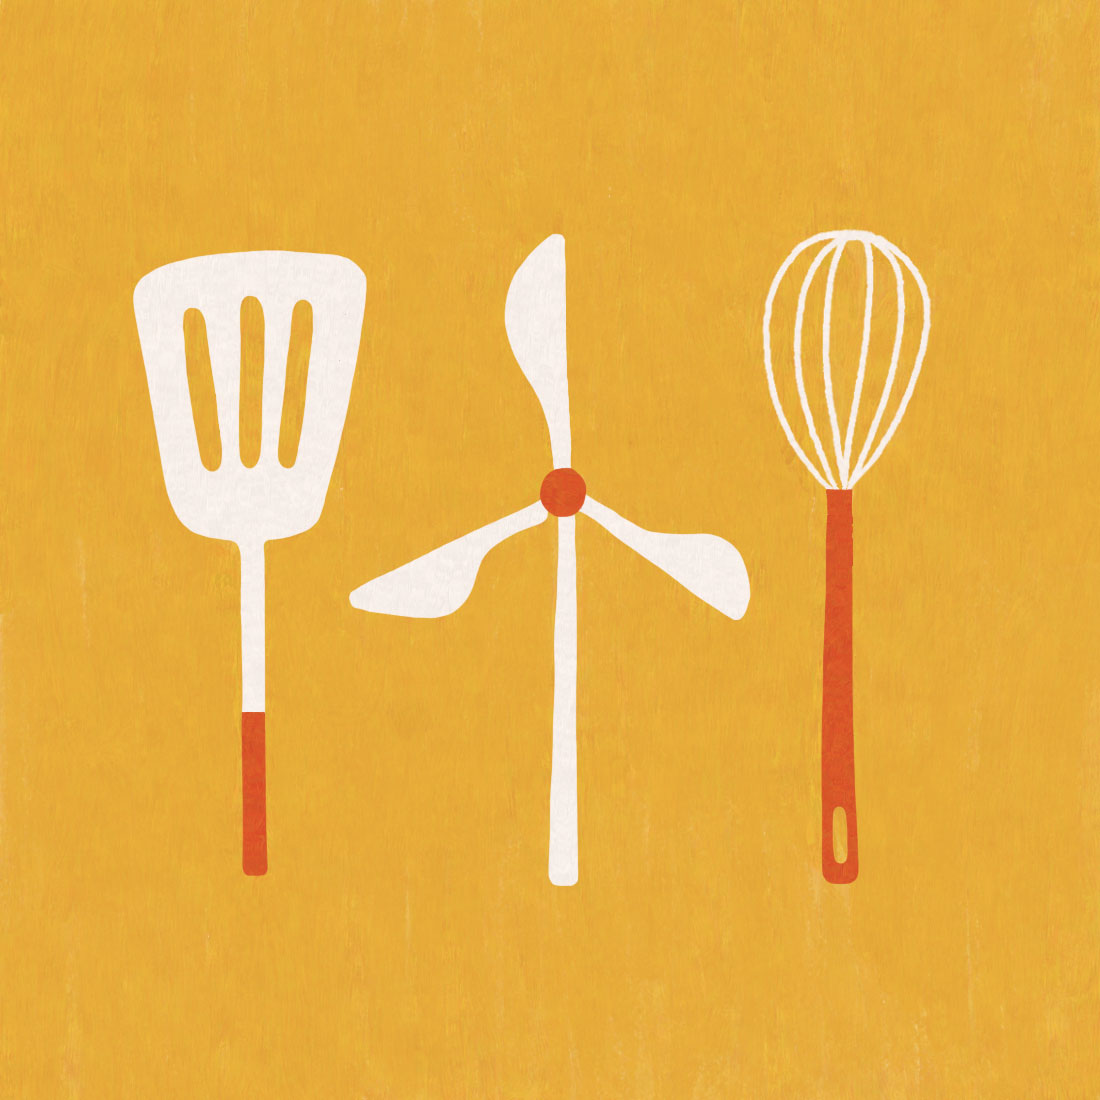 Illustration of a spatula, wind turbine and whisk